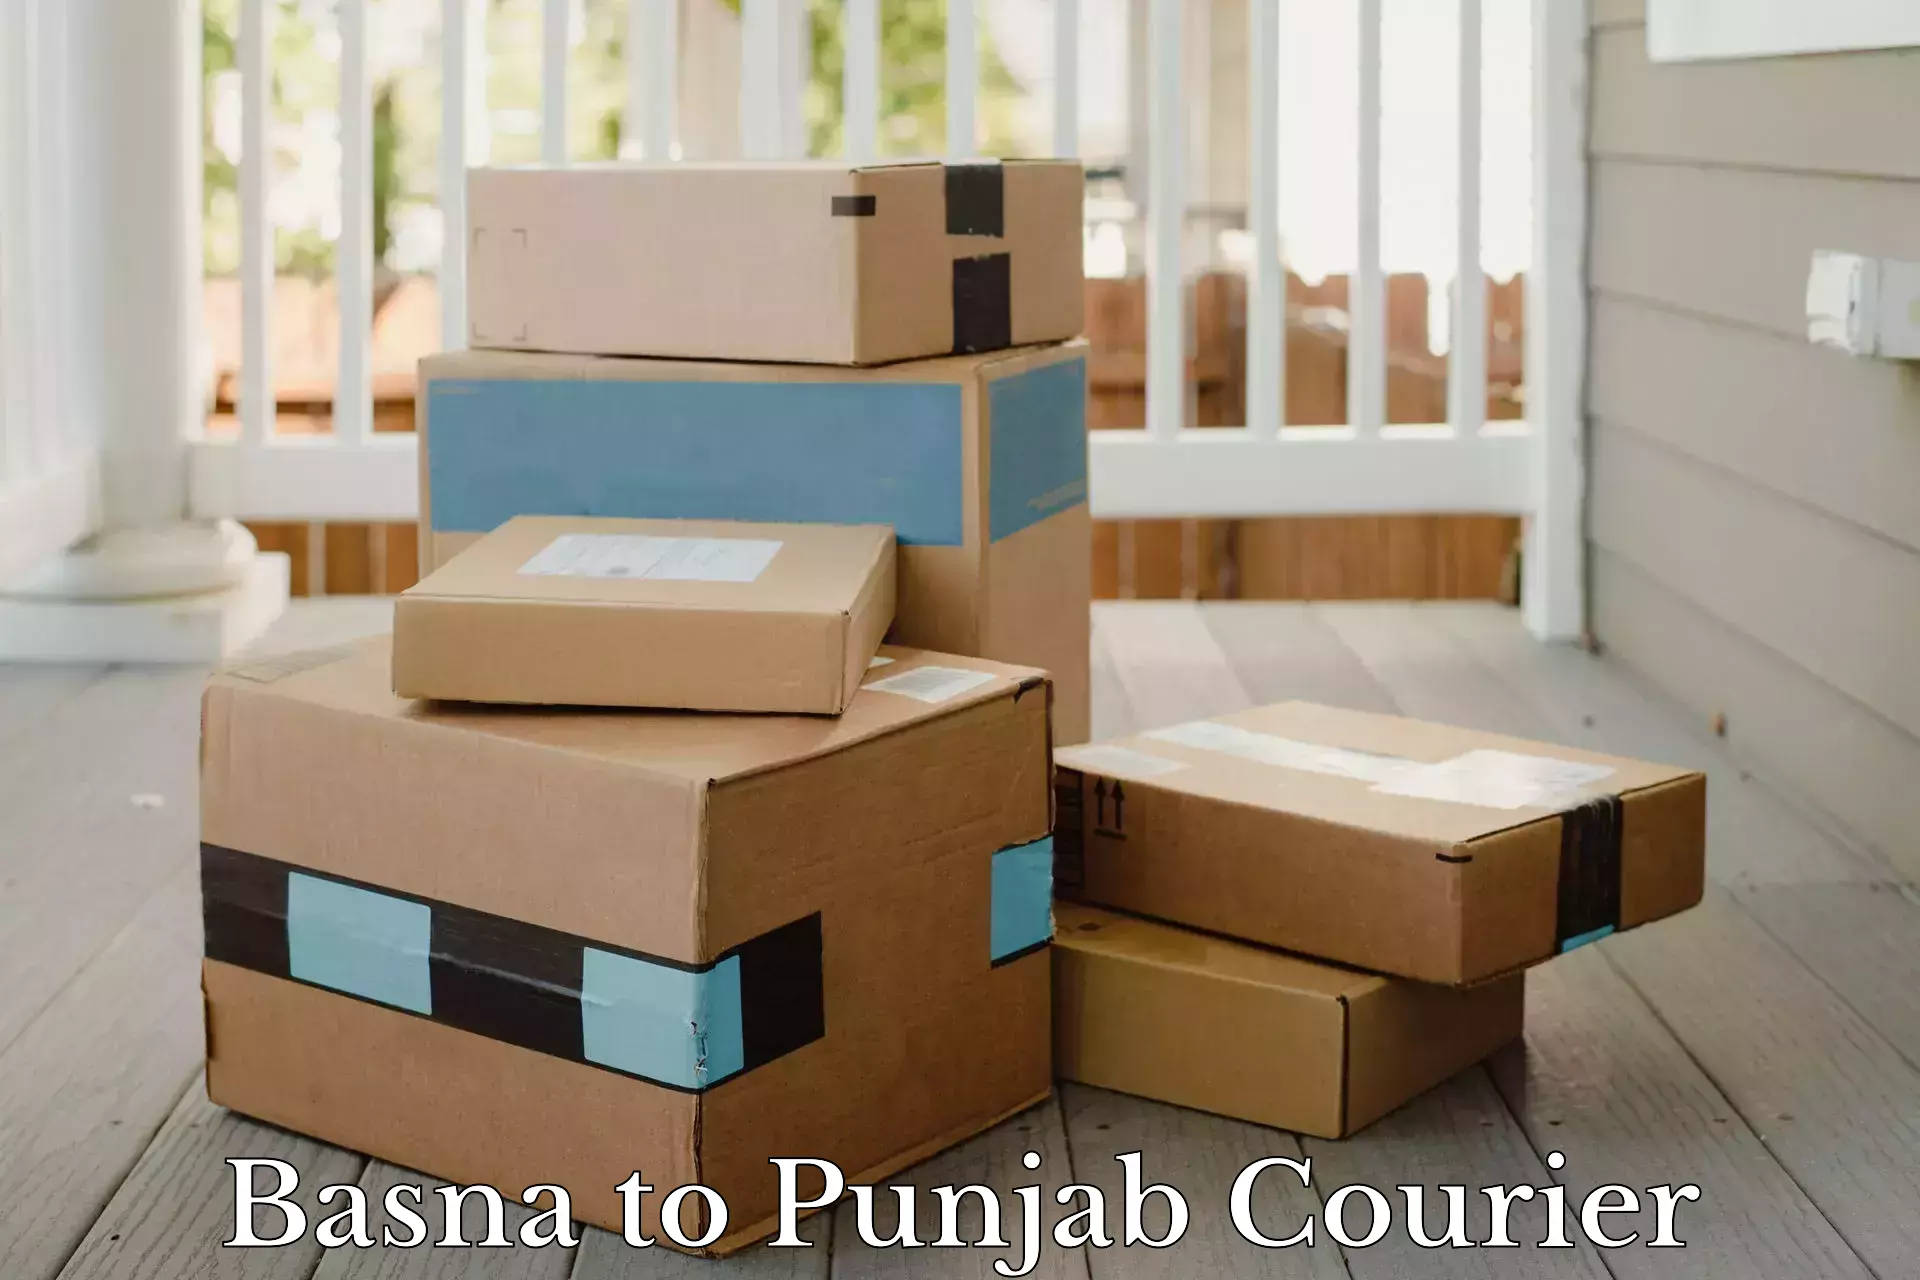 Courier service innovation in Basna to Punjab